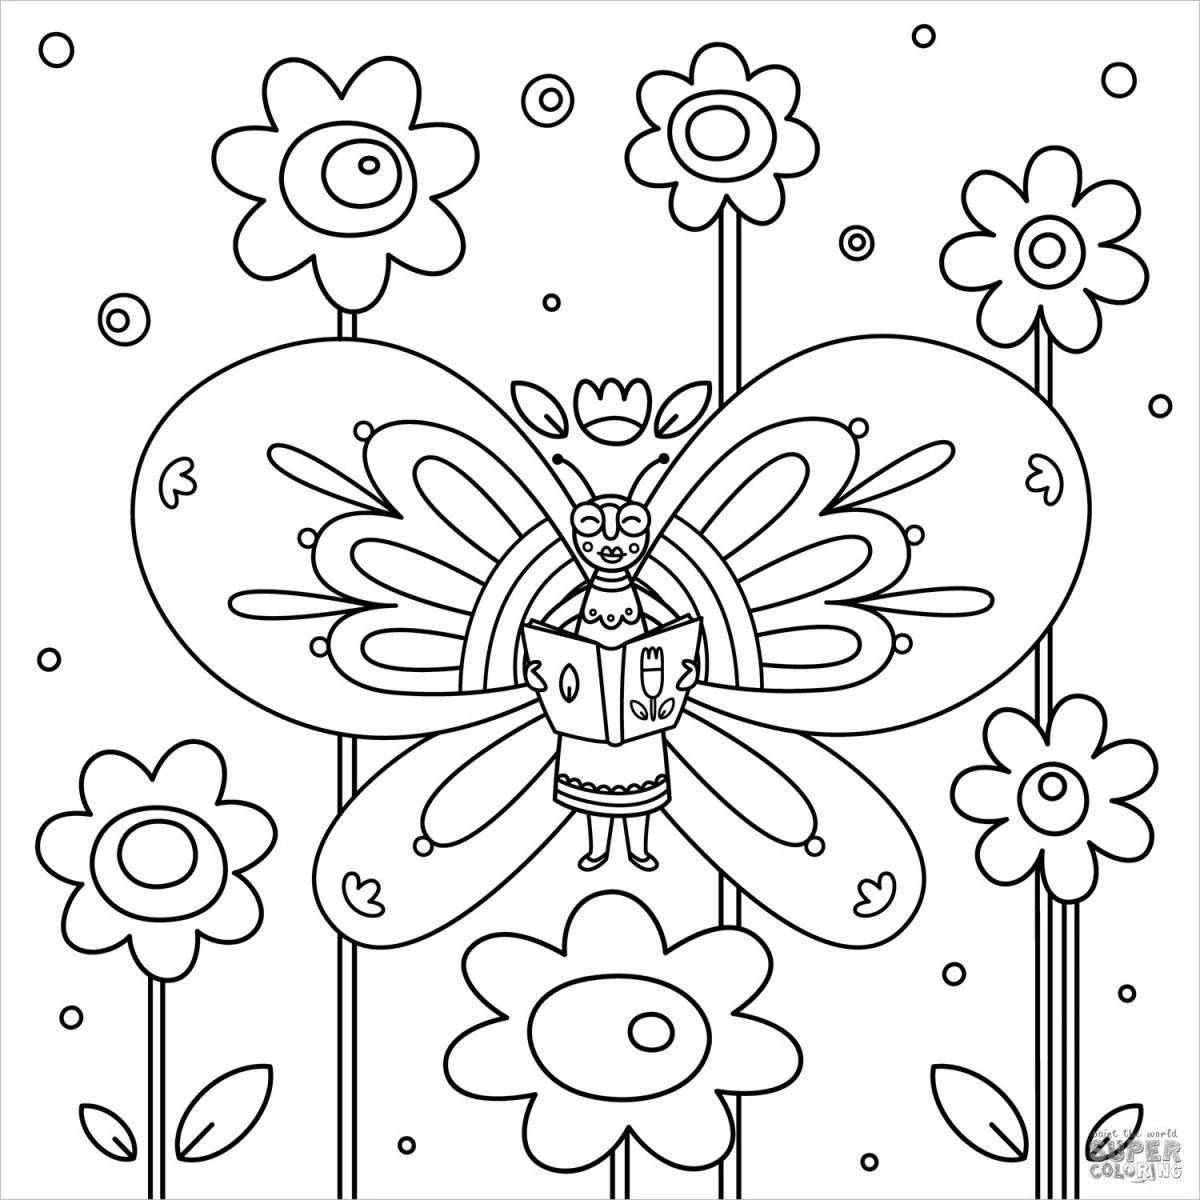 Awesome heritage butterfly coloring book